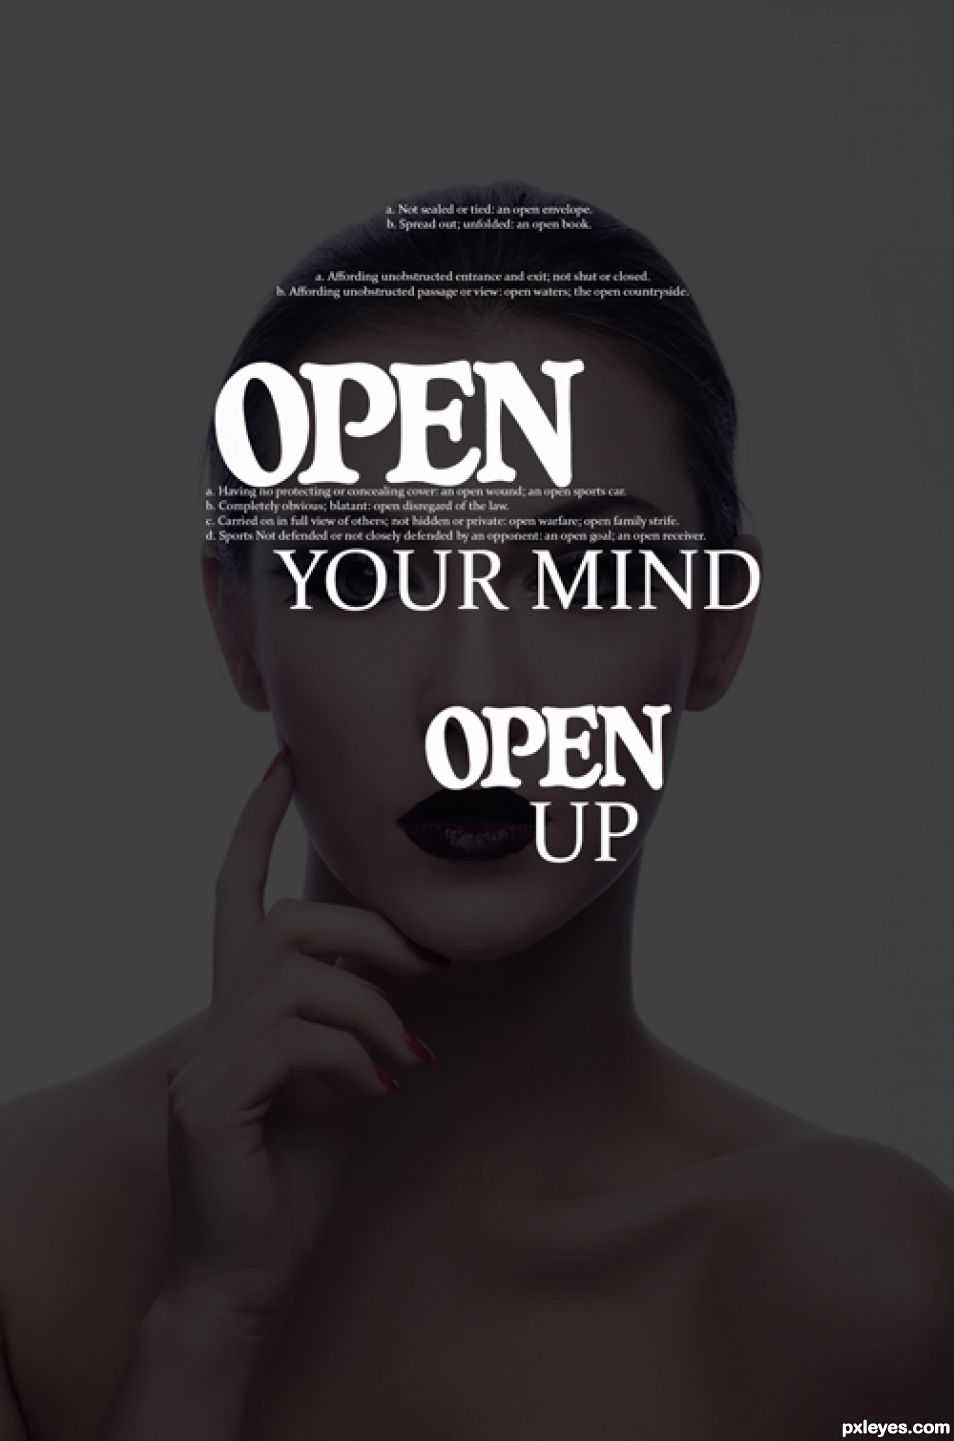 Creation of Open your mind: Step 3